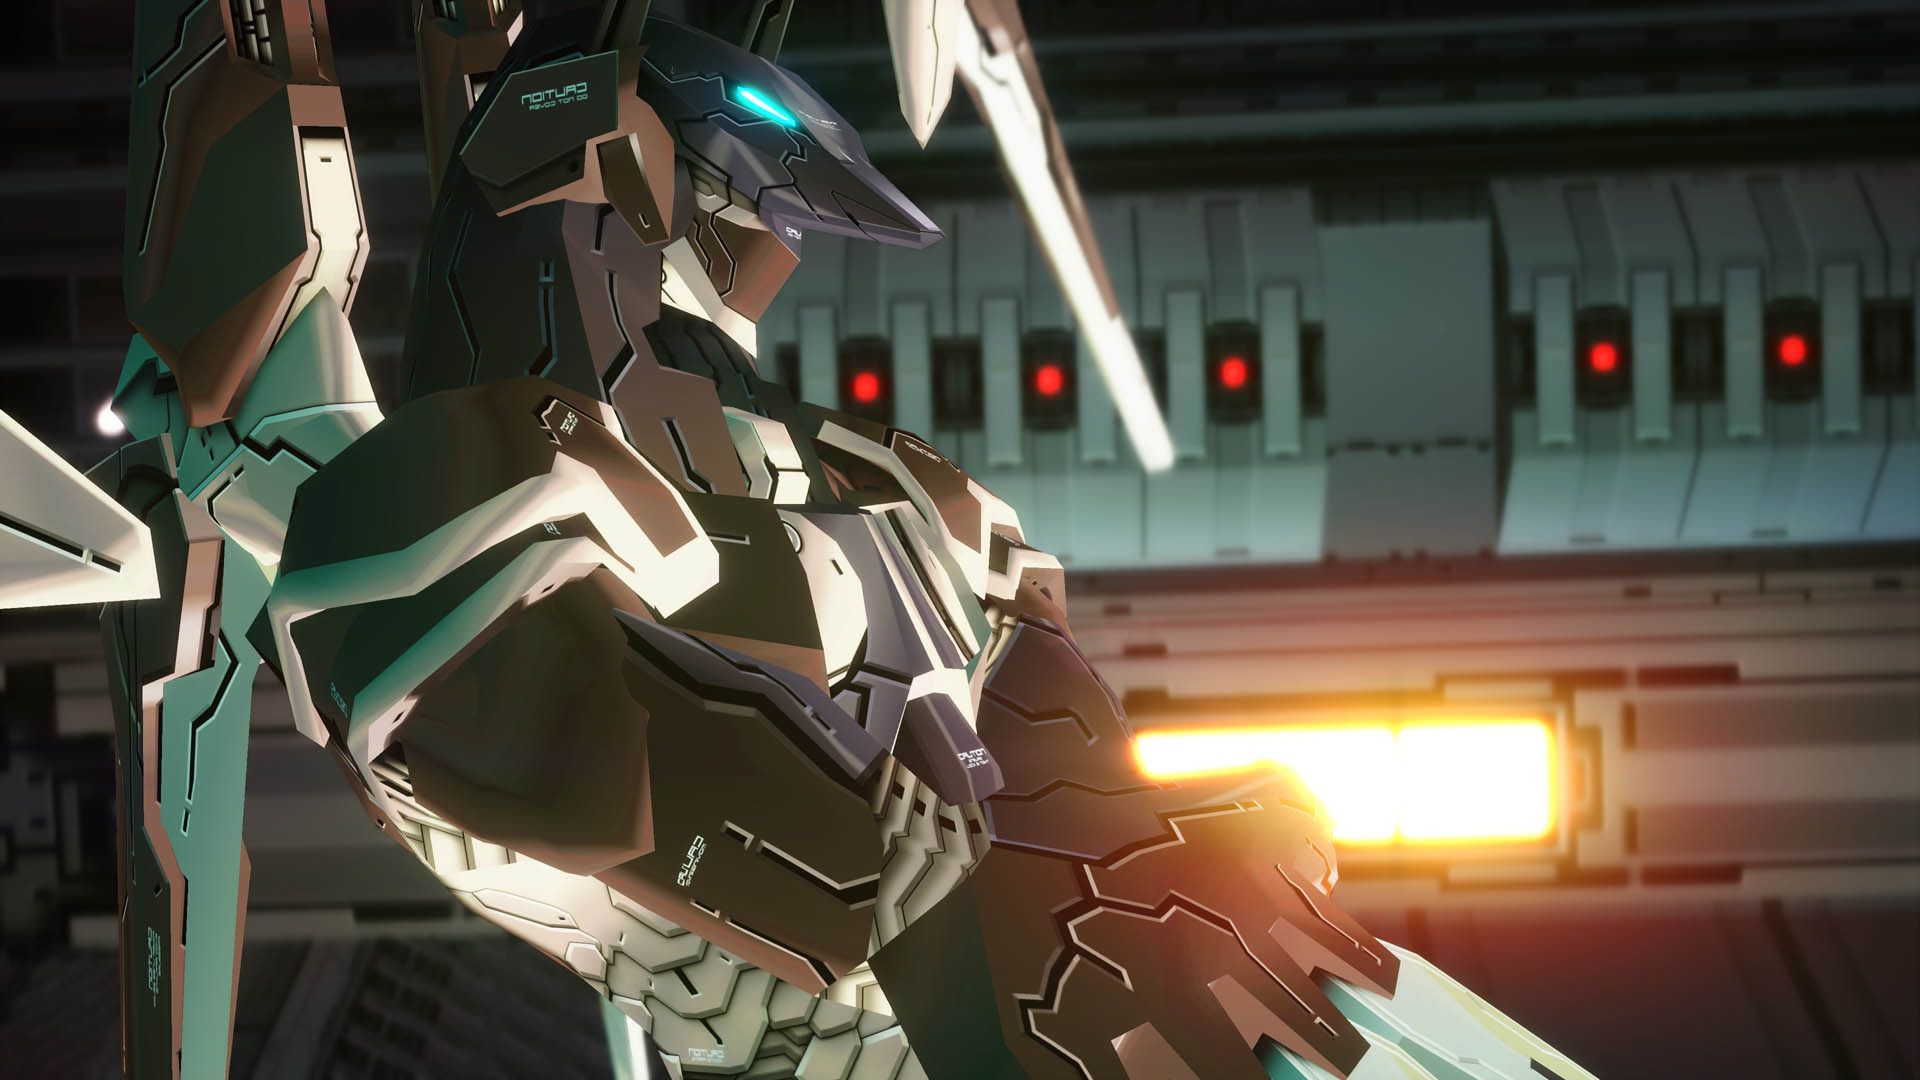 Zone Of The Enders 2 VR Announced For PS4 And PC, Includes 4K Support